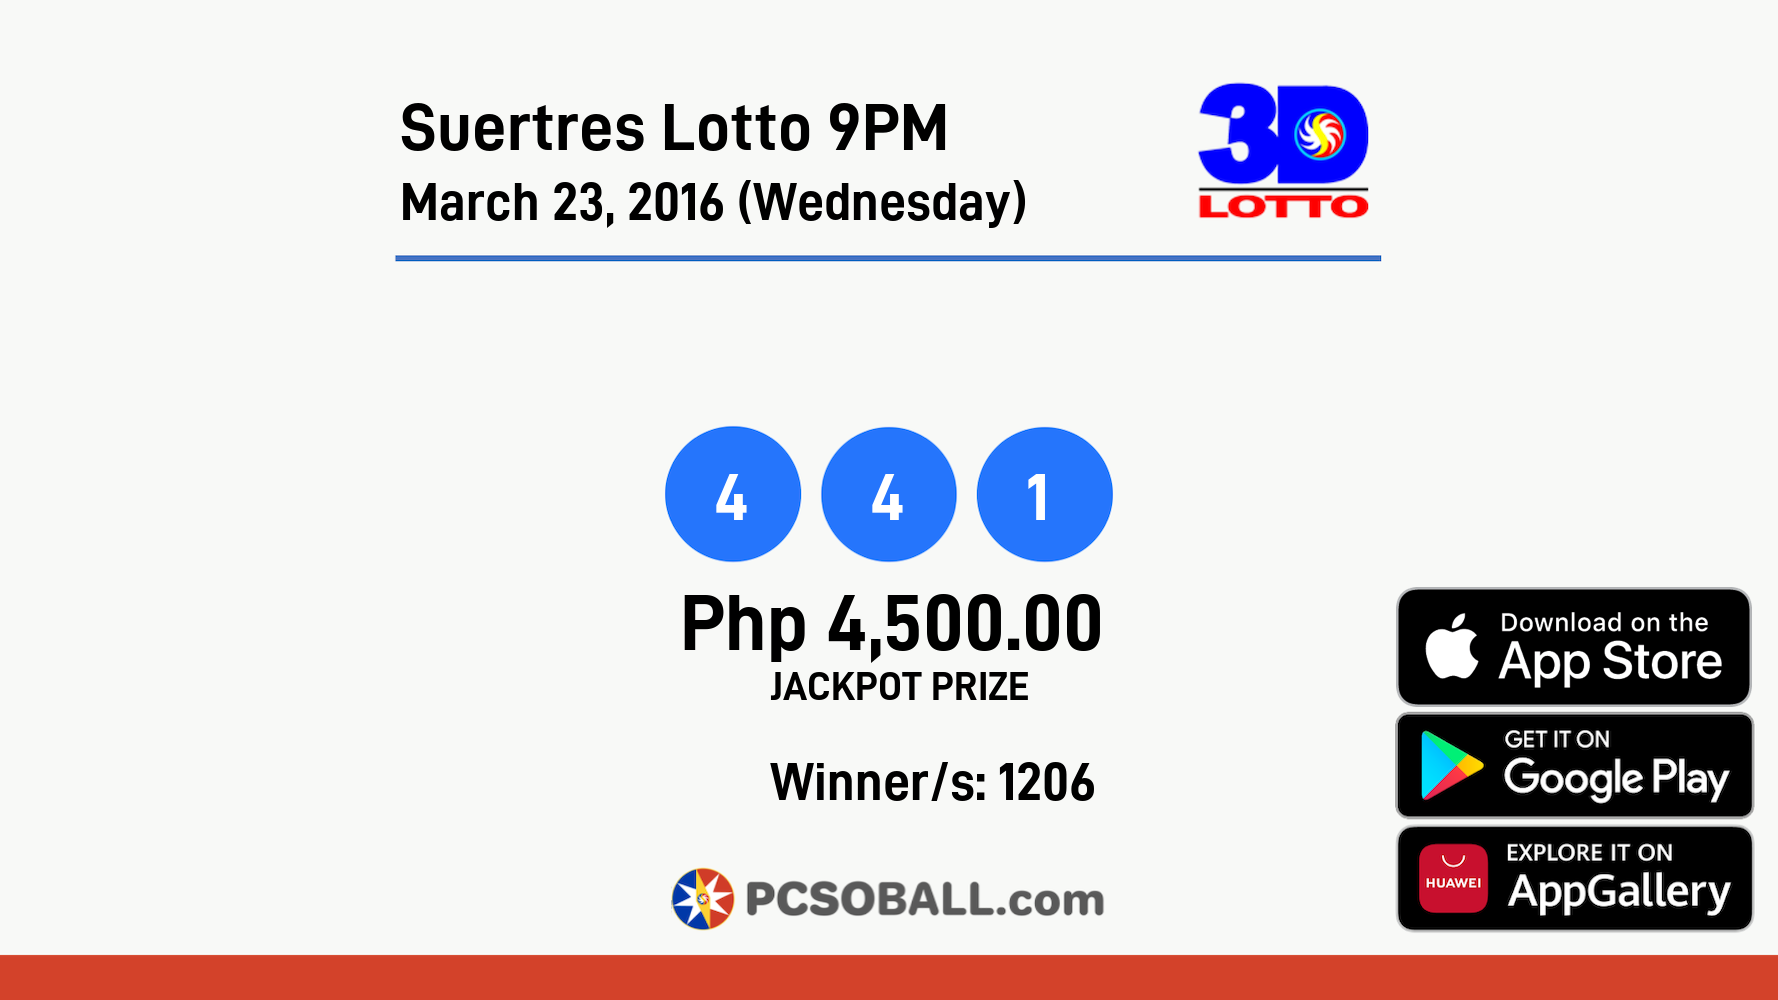 Suertres Lotto 9PM March 23, 2016 (Wednesday) Result